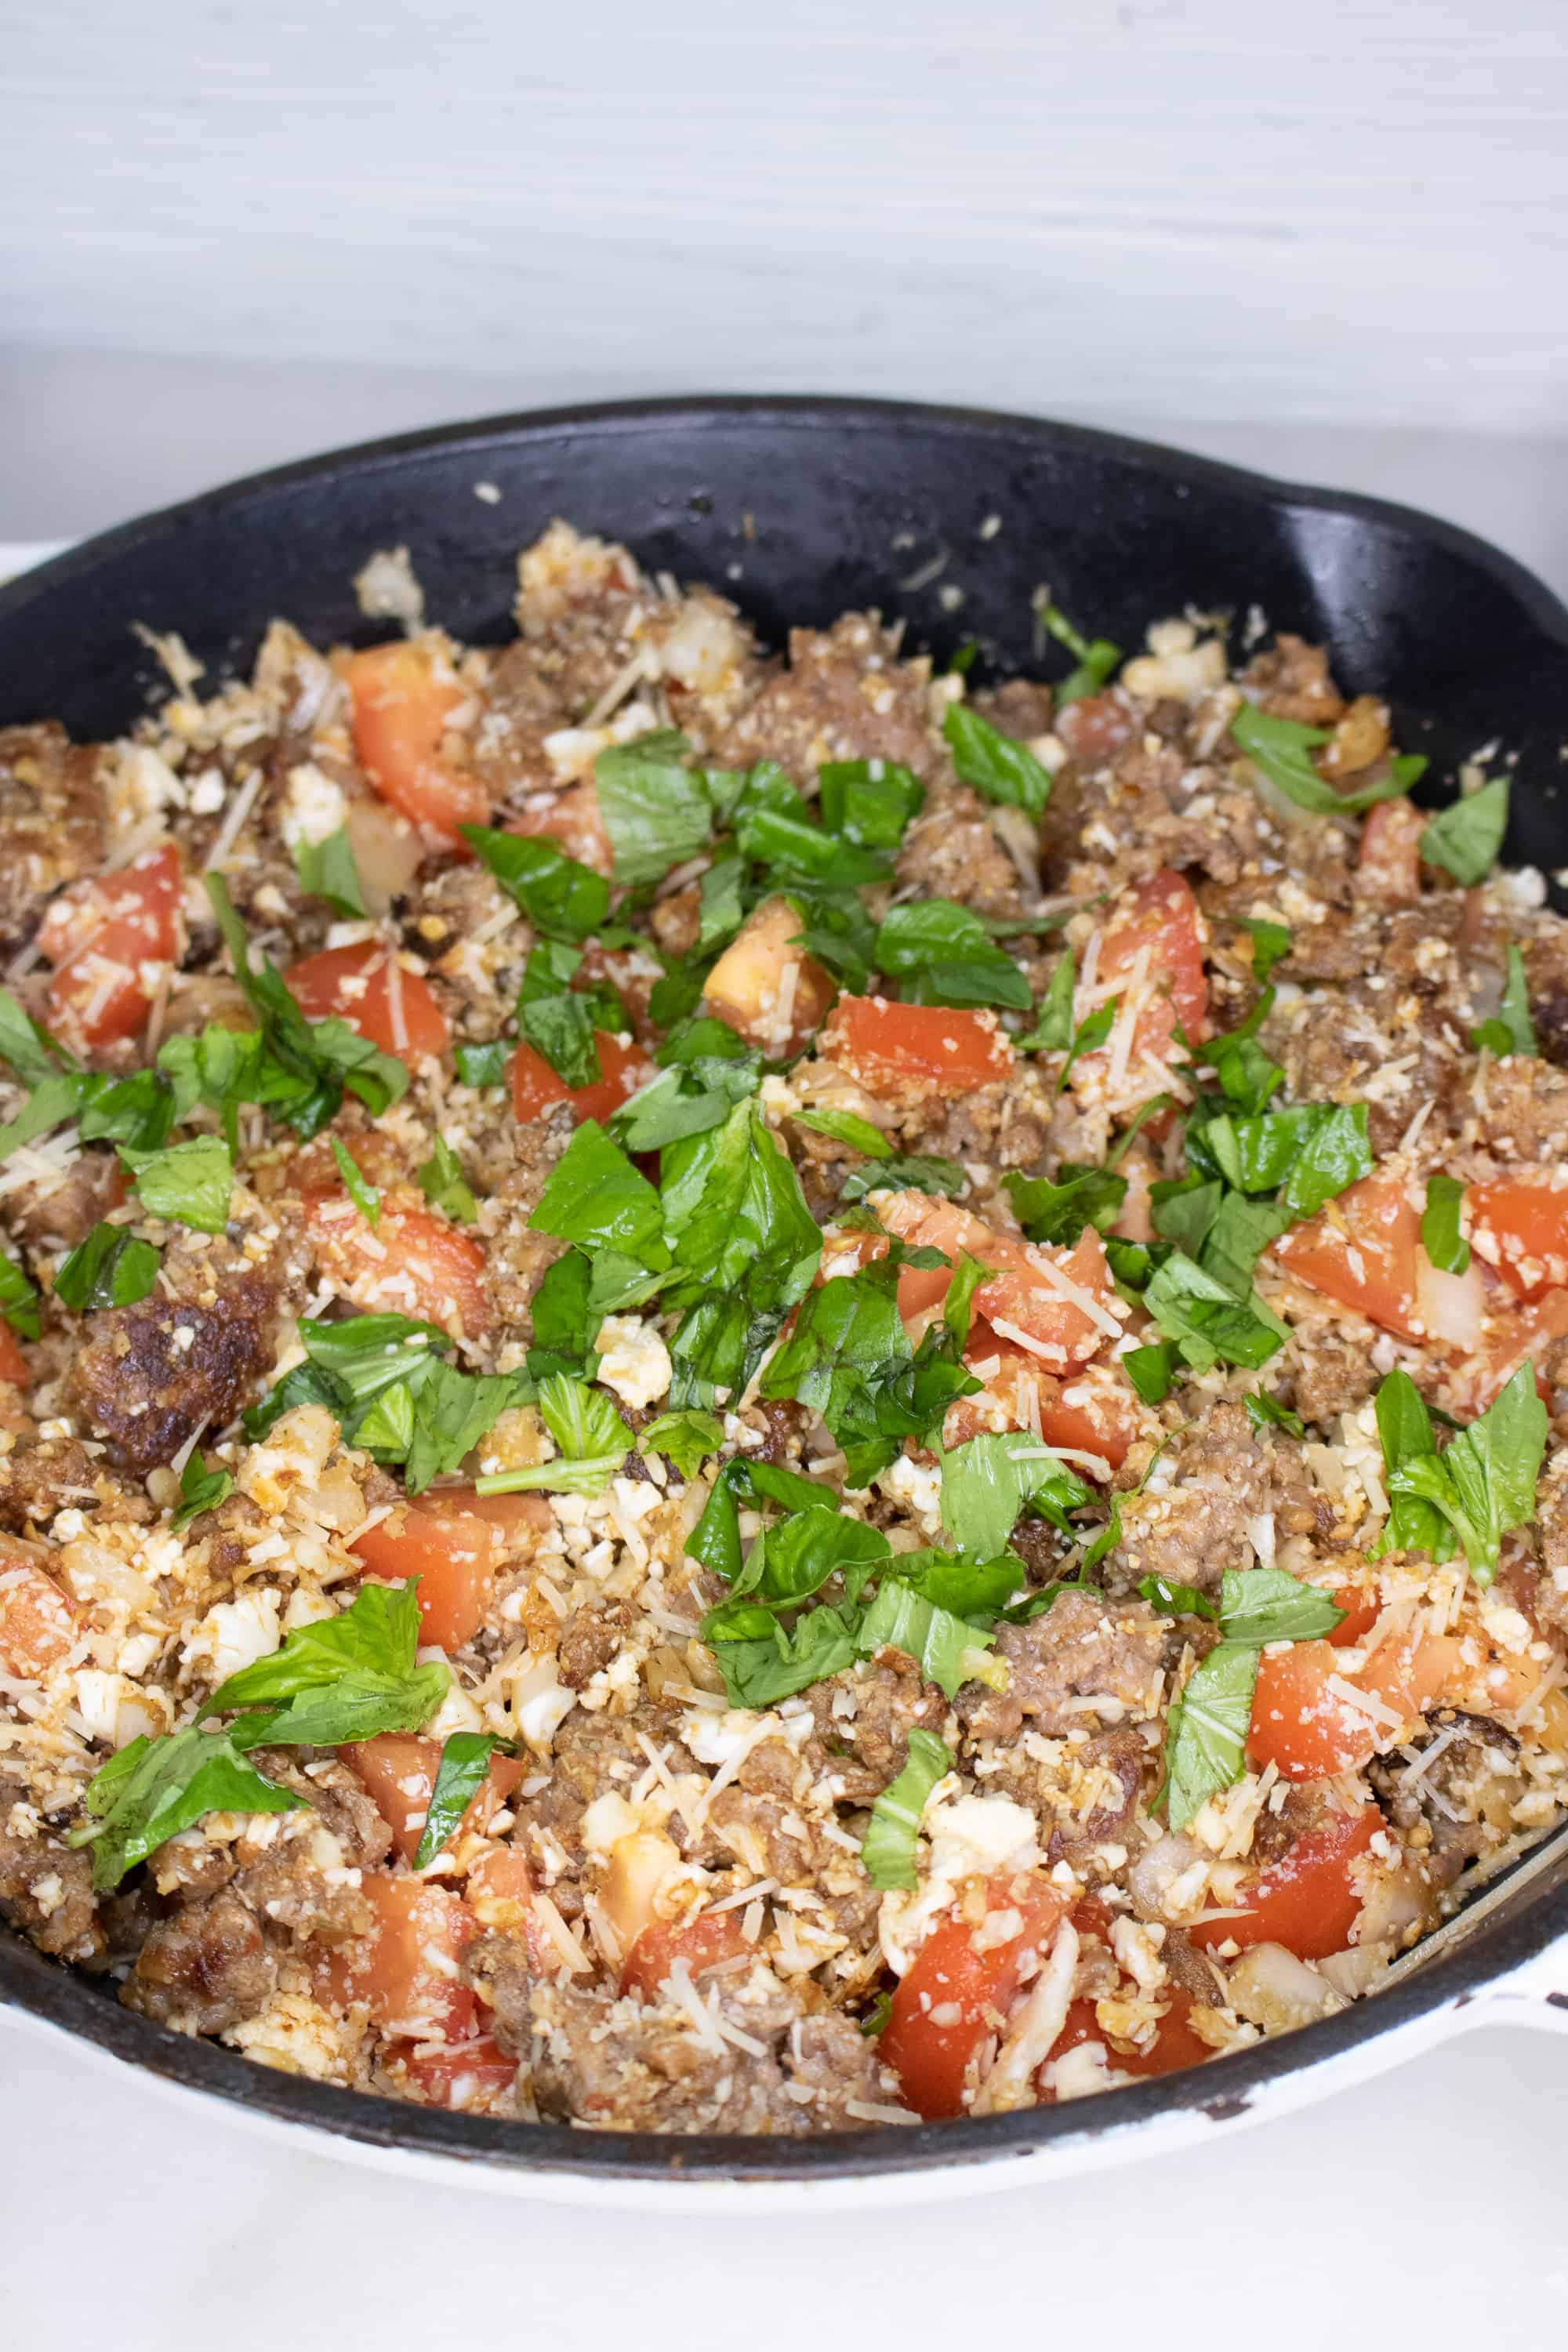 Italian sausage, cauliflower rice, tomatoes, onions and lettuce cooked together in an iron skillet